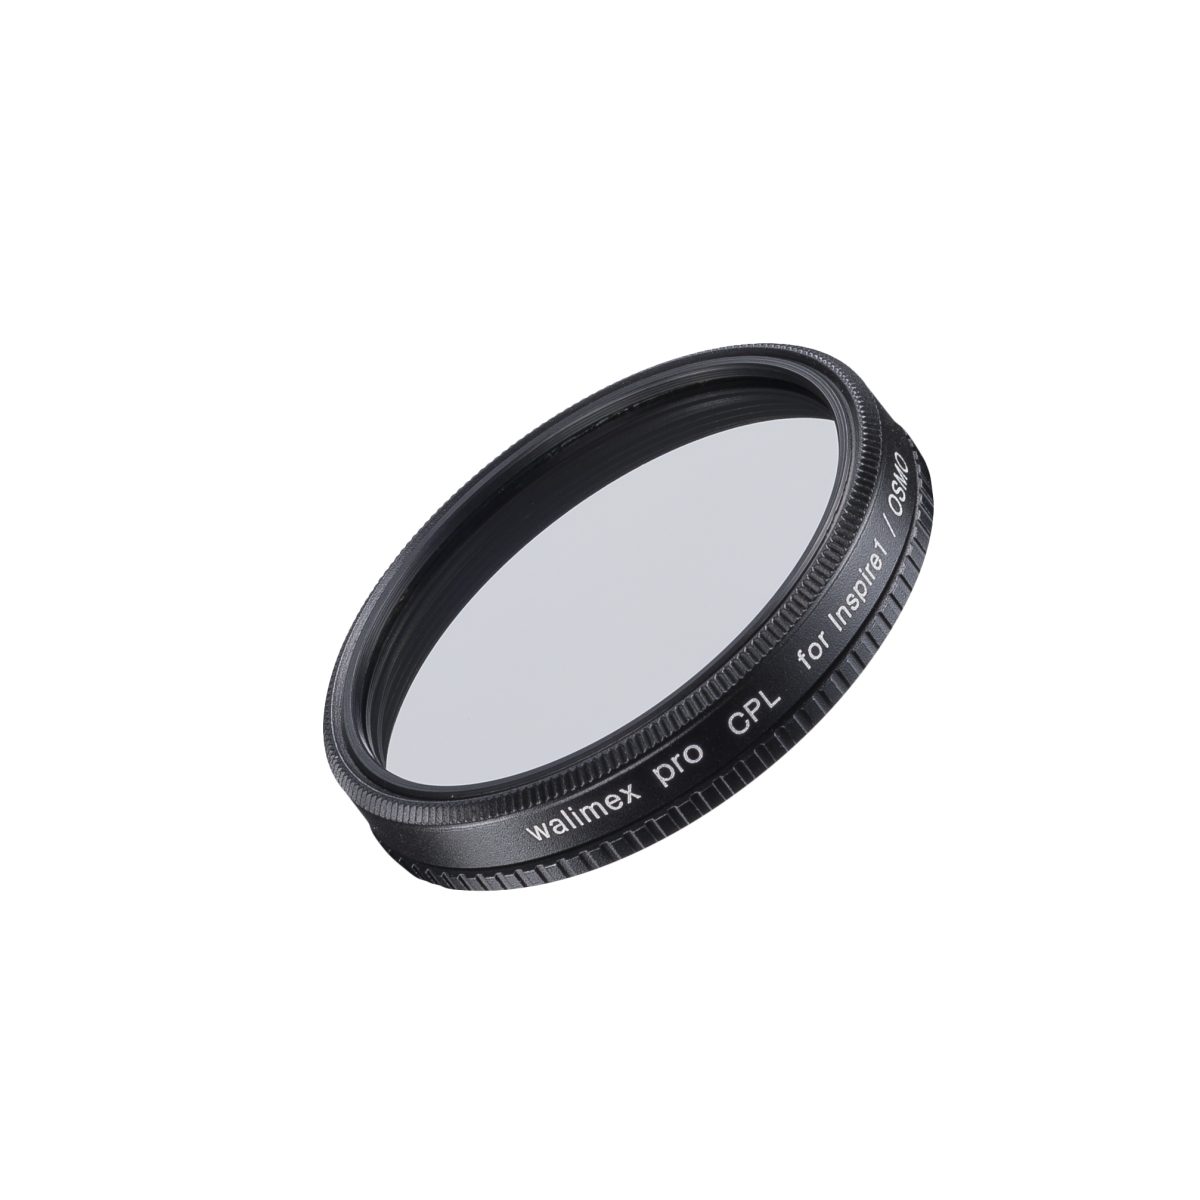 Walimex pro CPL filter for DJI Inspire1(X3)